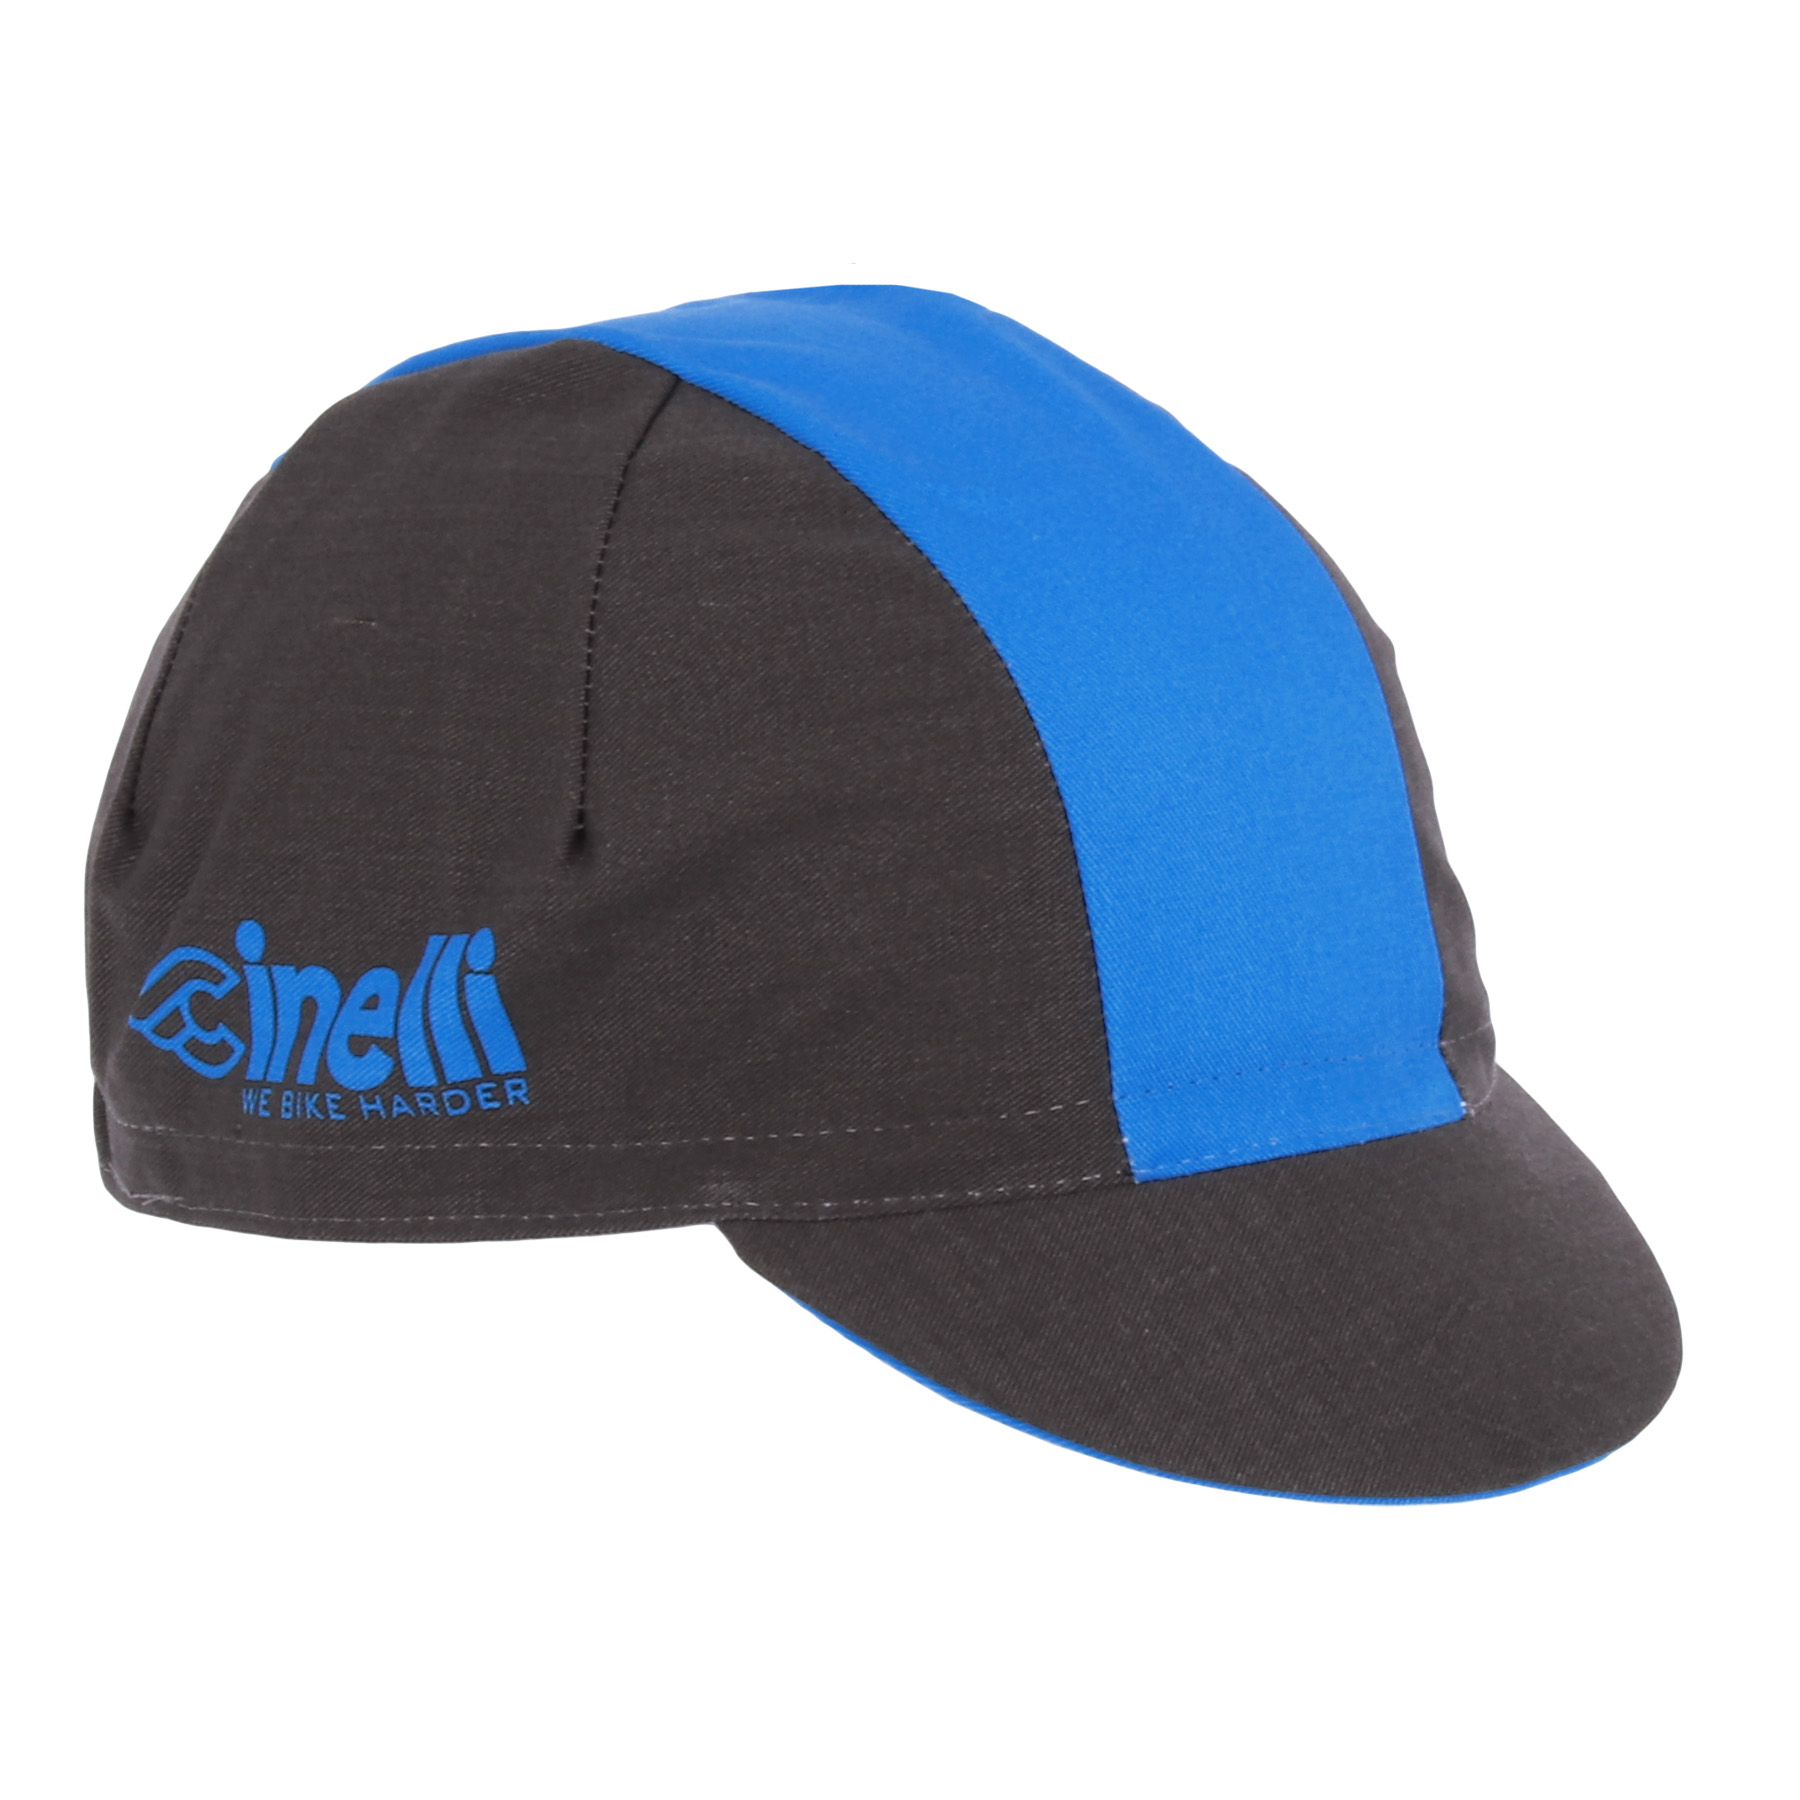 Picture of Cinelli We Bike Harder - Cycling Cap - Blue Line